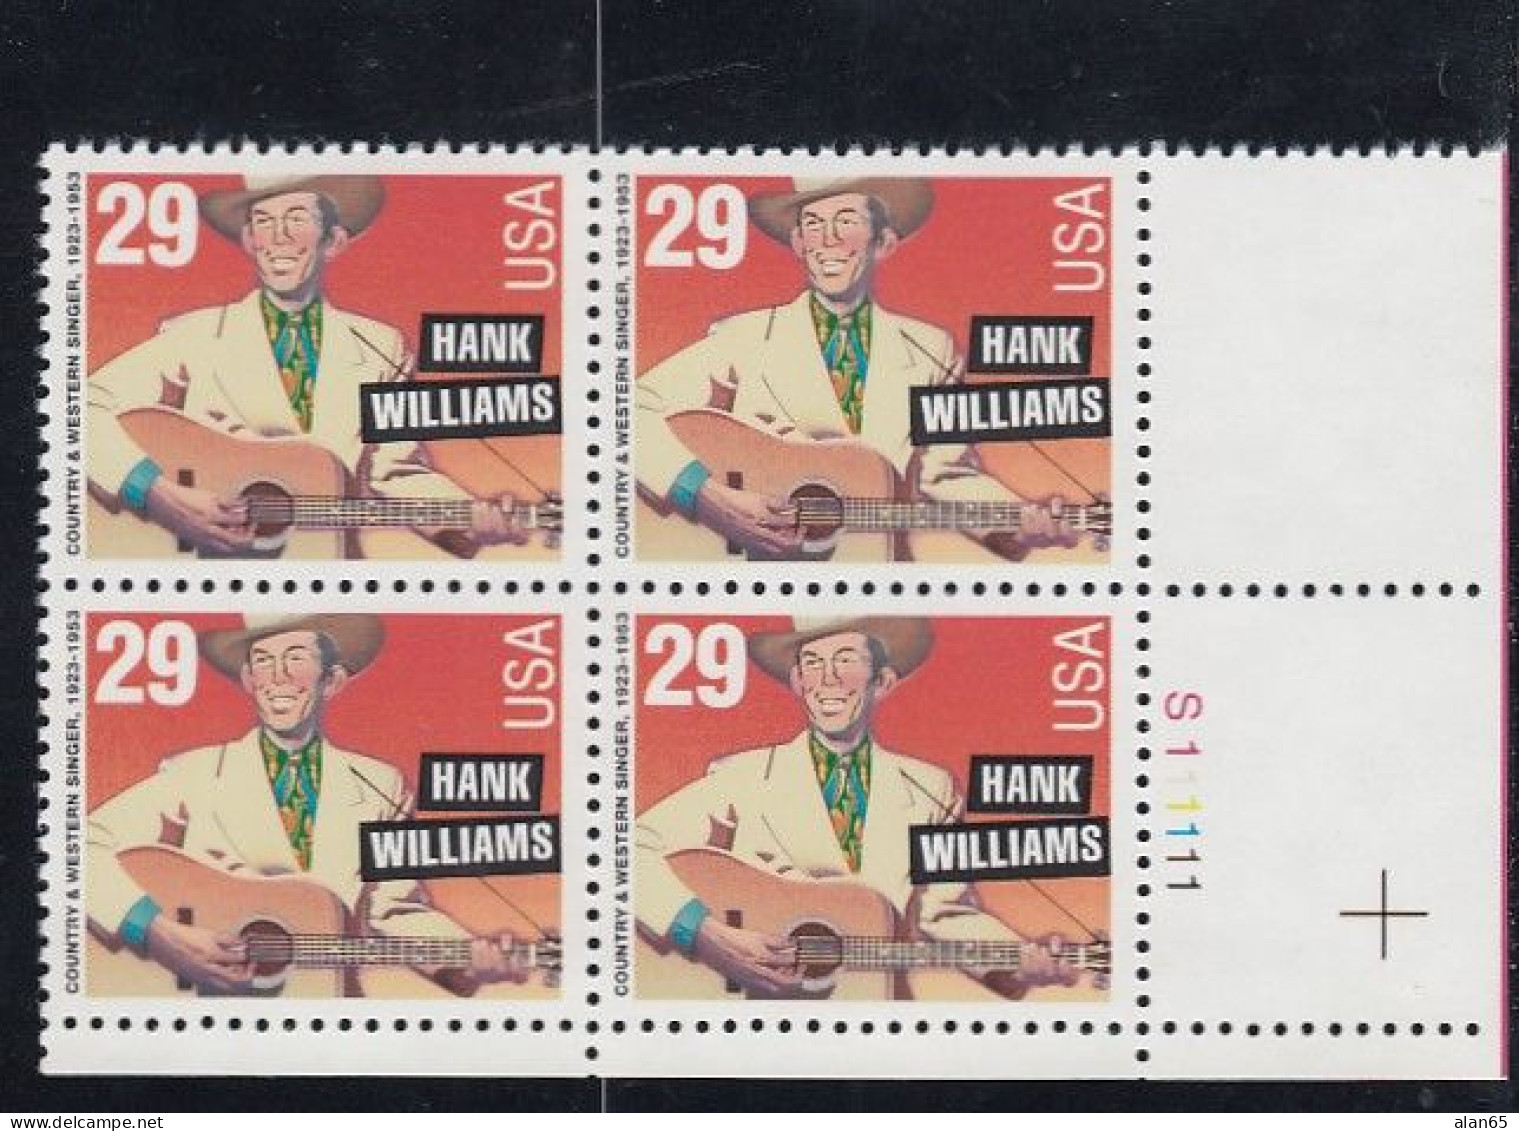 Sc#2723, Hank Williams Country Music Singer Composer, Musical Series, 29-cent Plate Number Block Of 4 MNH Stamps - Plattennummern